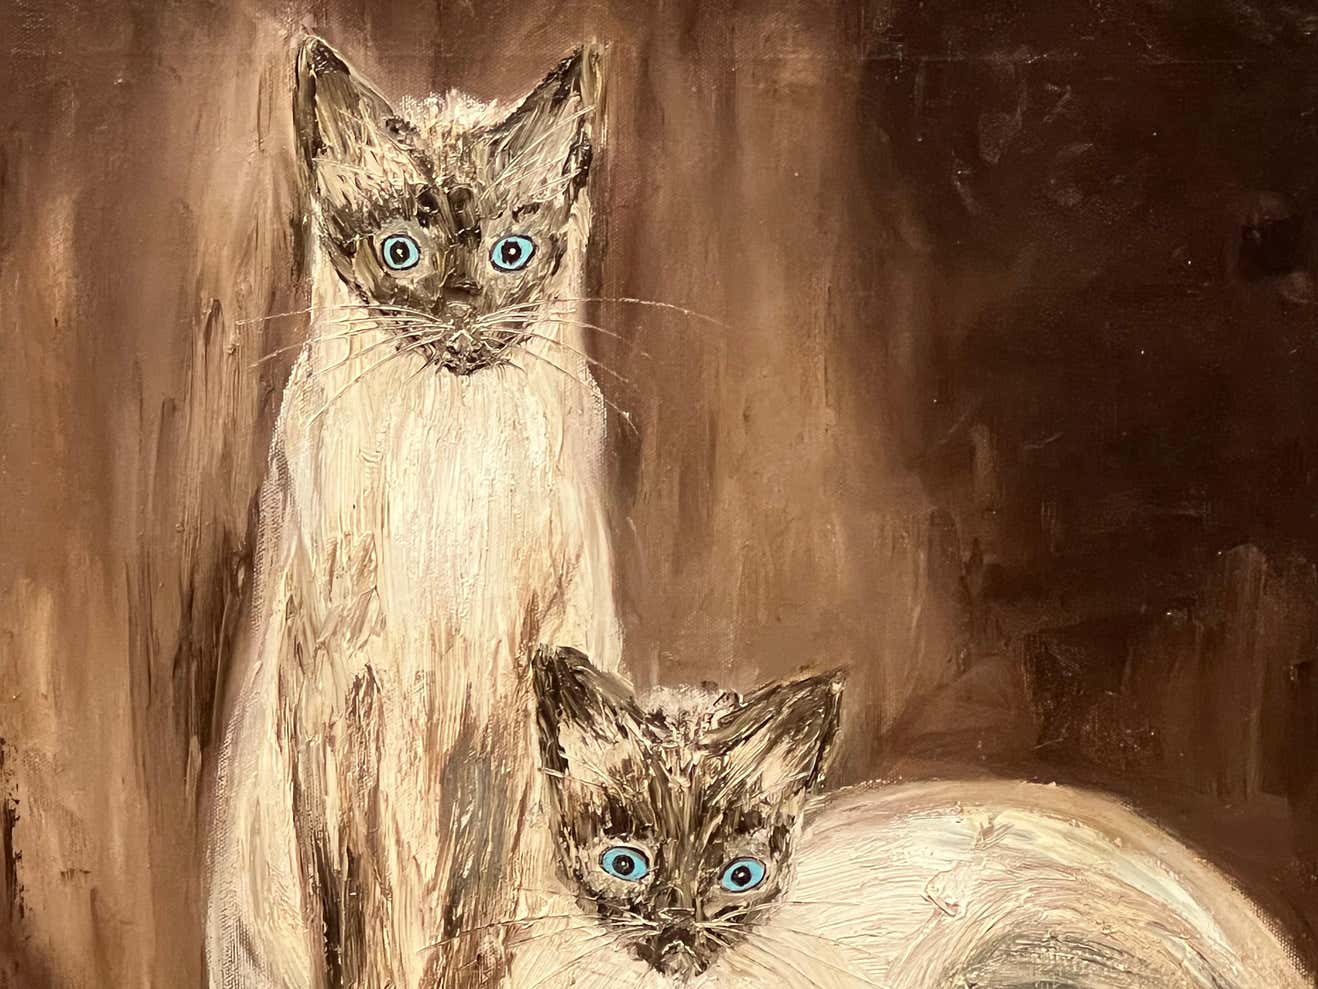 "Siamese Twins" Post-Impressionist Animal Oil Portrait of Two Cats